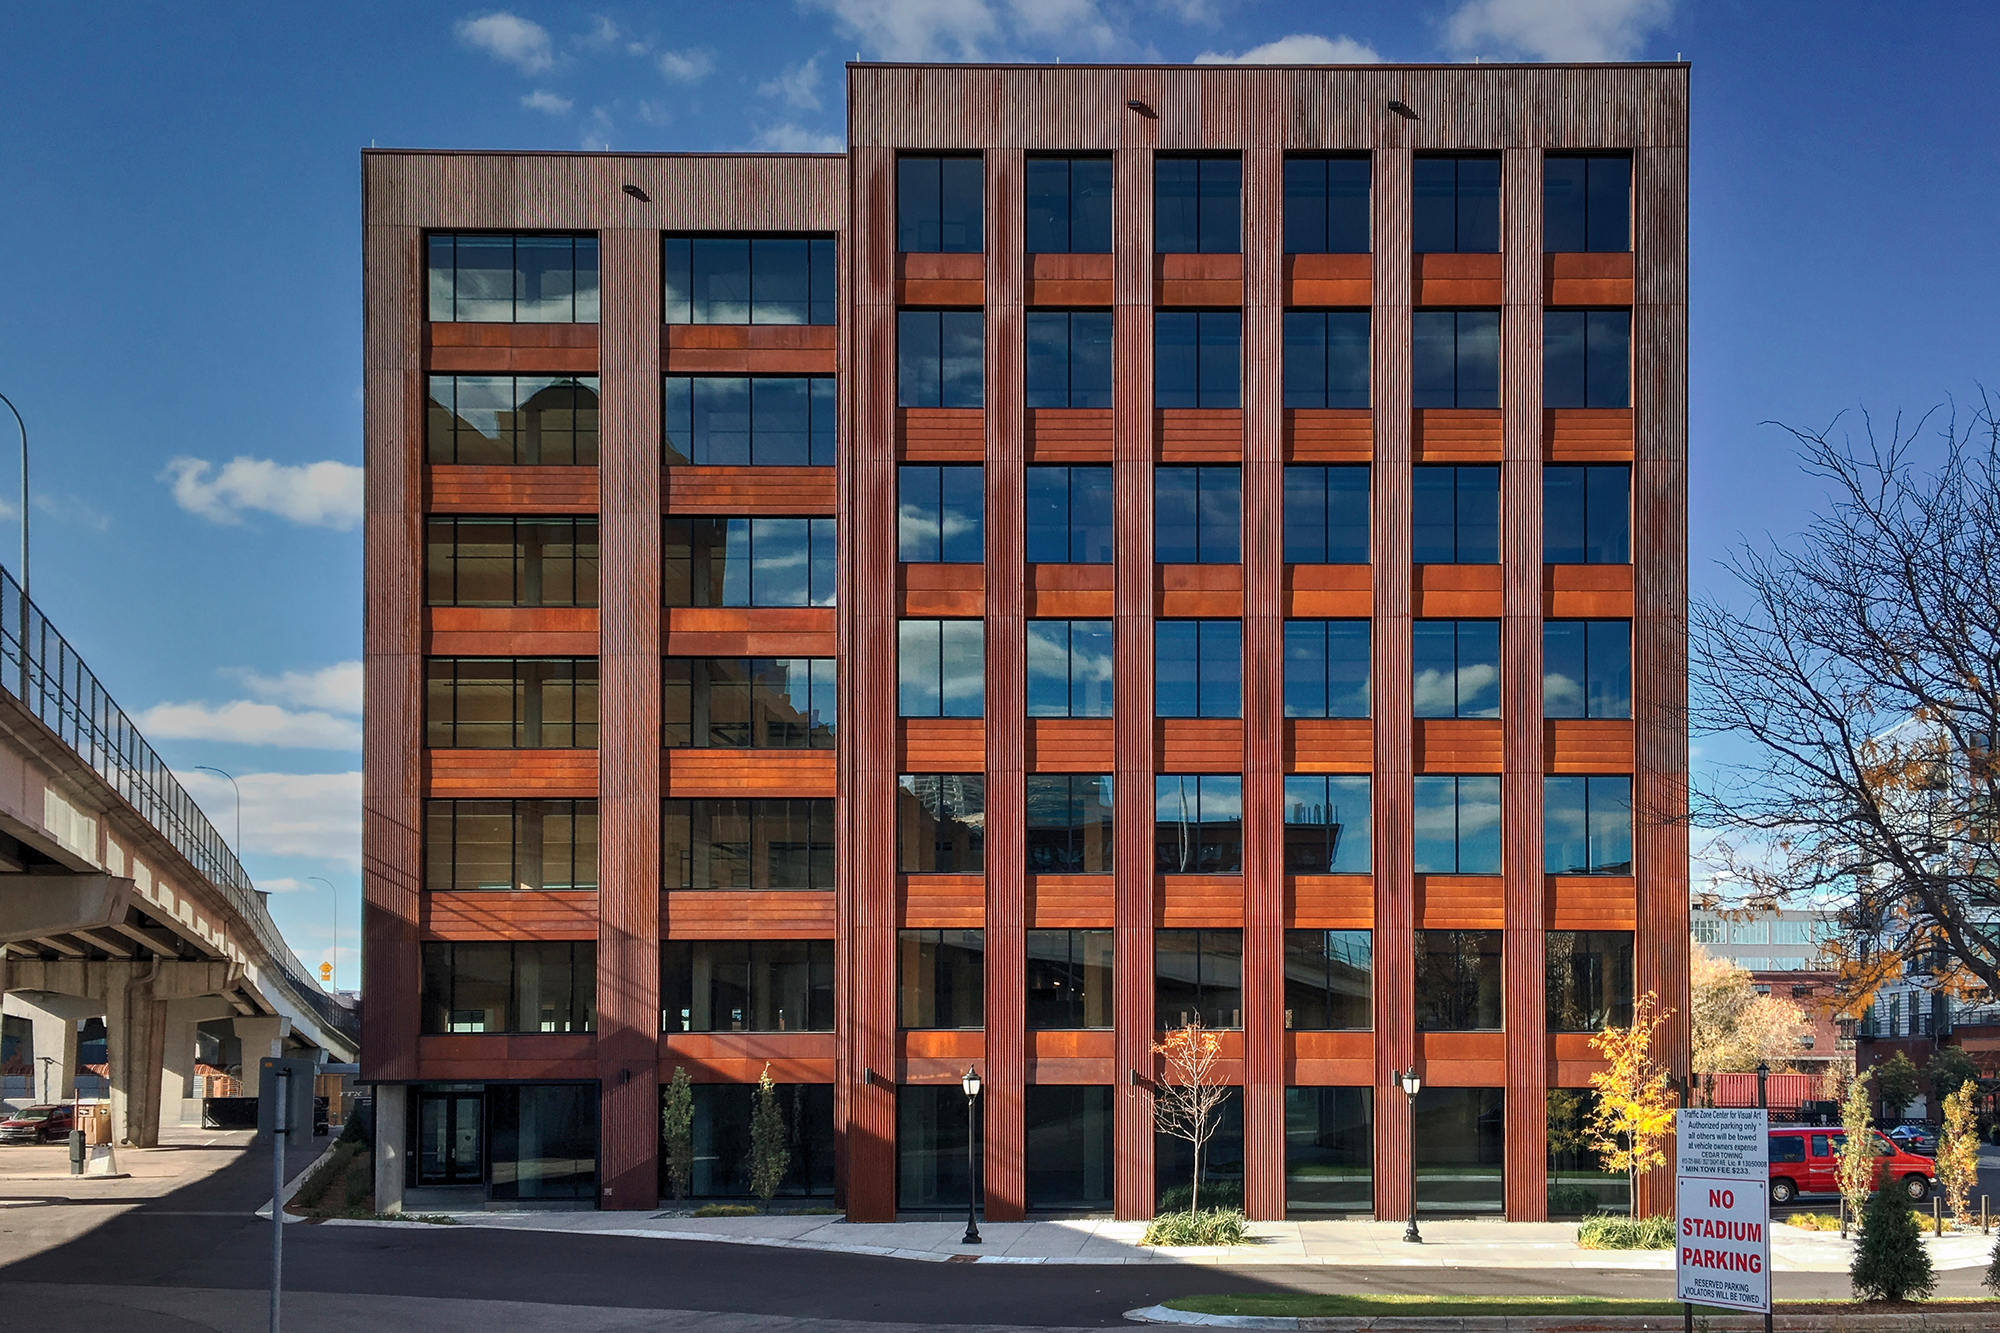 T3 Becomes the First Modern Tall Wood Building in the U.S. ...